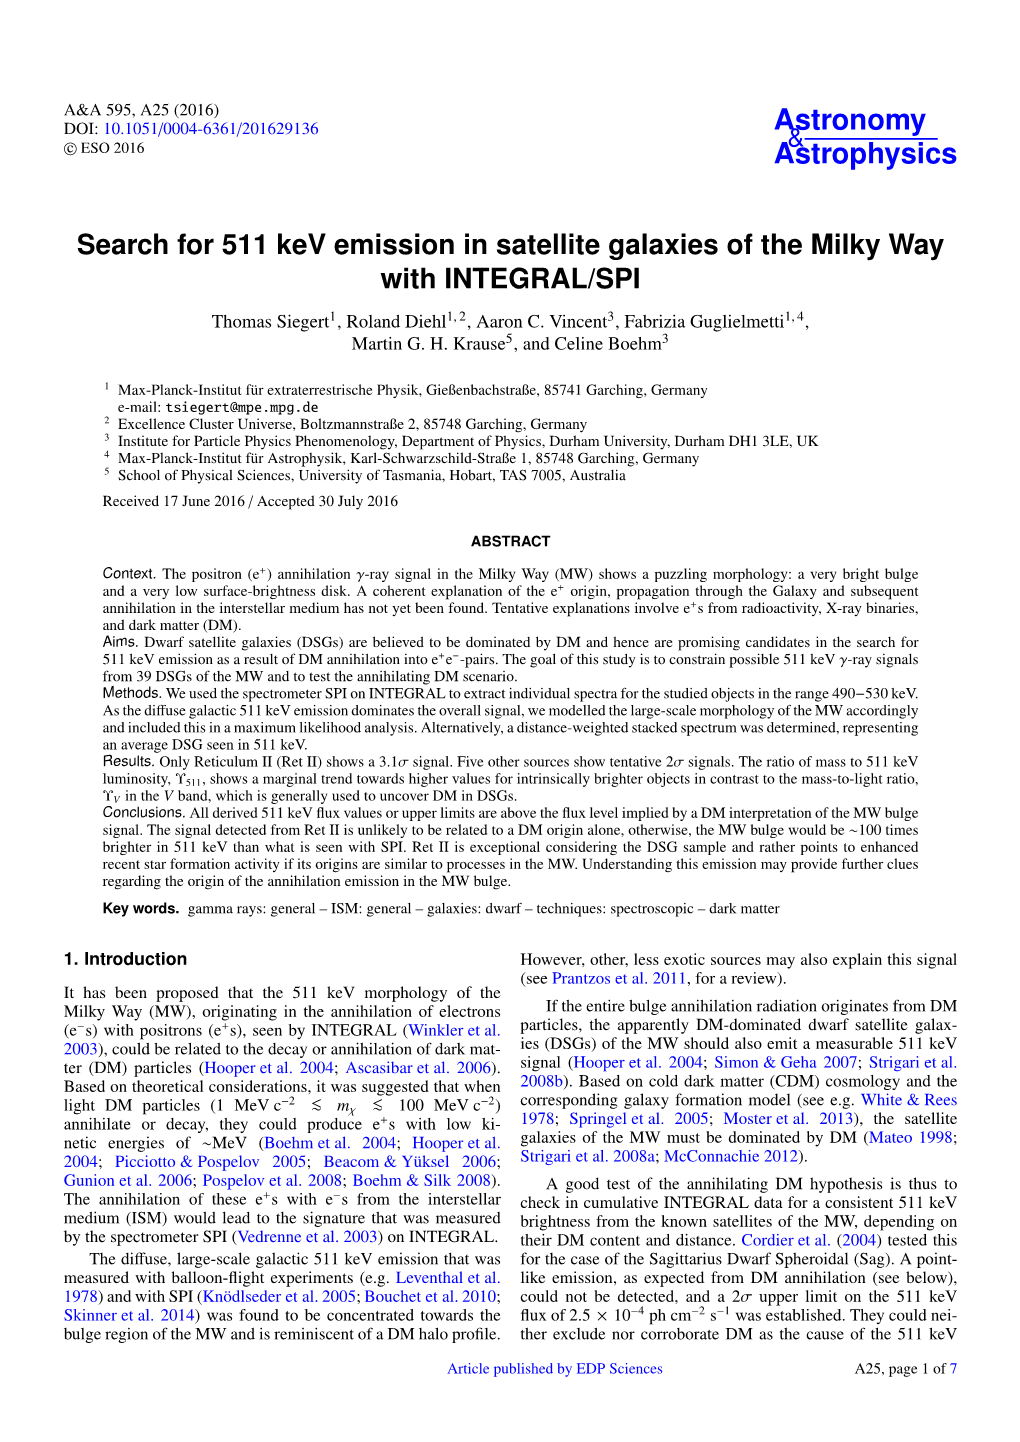 Search for 511 Kev Emission in Satellite Galaxies of the Milky Way with INTEGRAL/SPI Thomas Siegert1, Roland Diehl1, 2, Aaron C